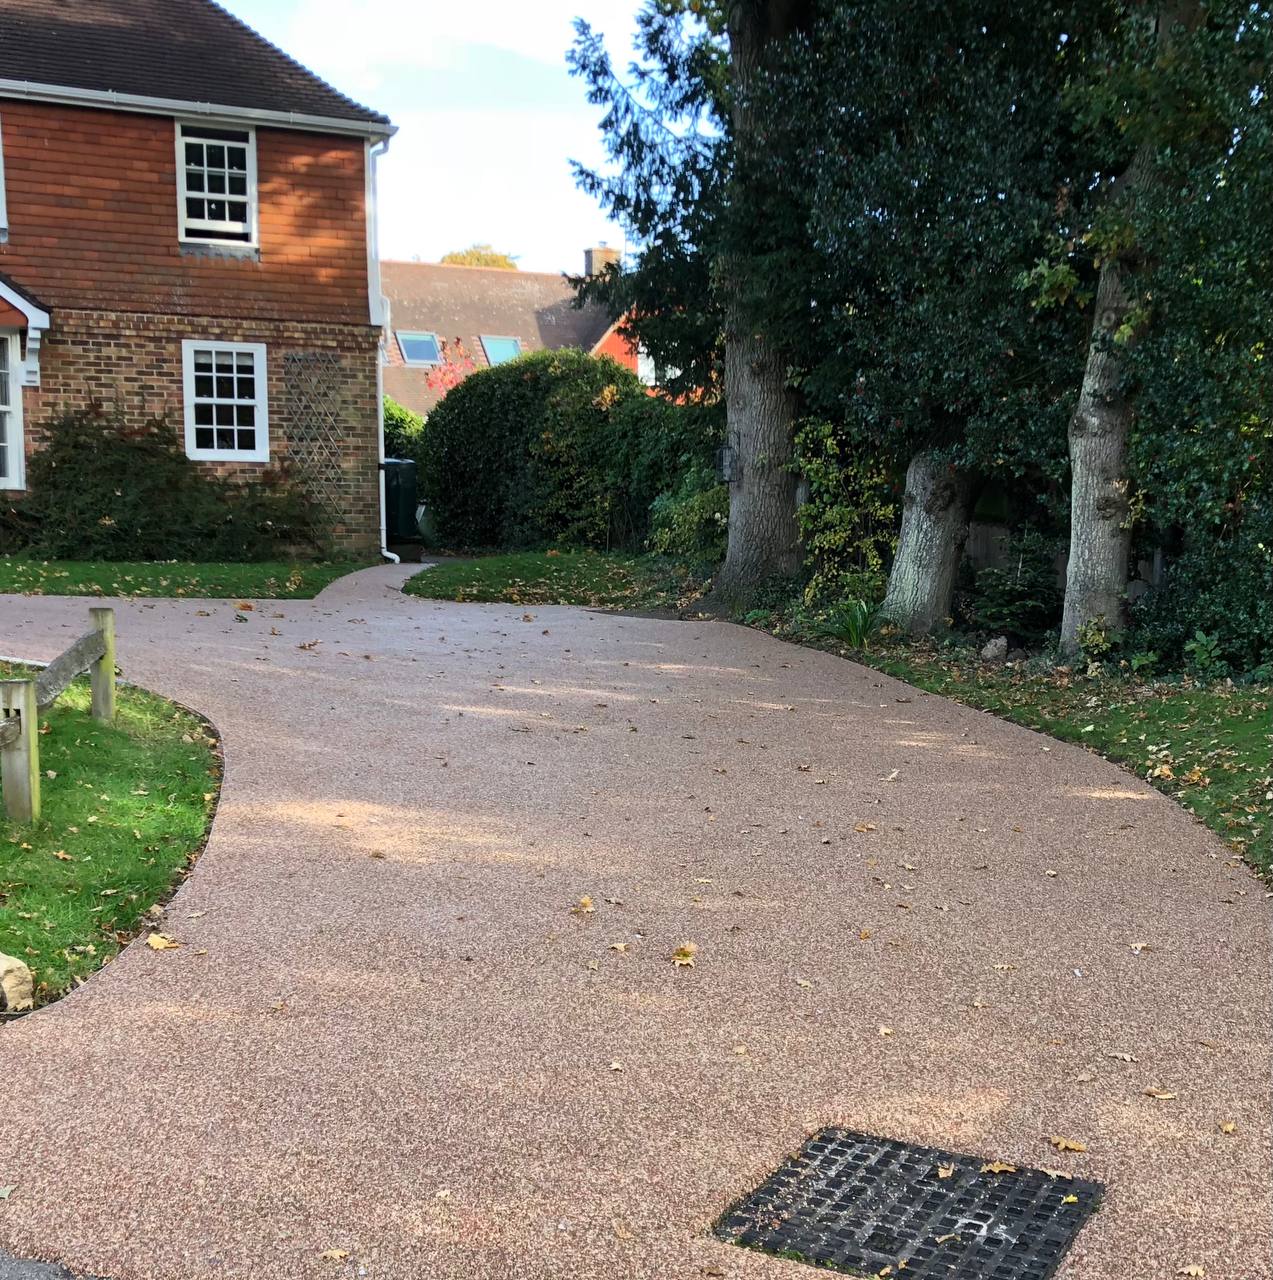 This is a photo of a Resin bound driveway carried out in a district of Bolton. All works done by Resin Driveways Bolton